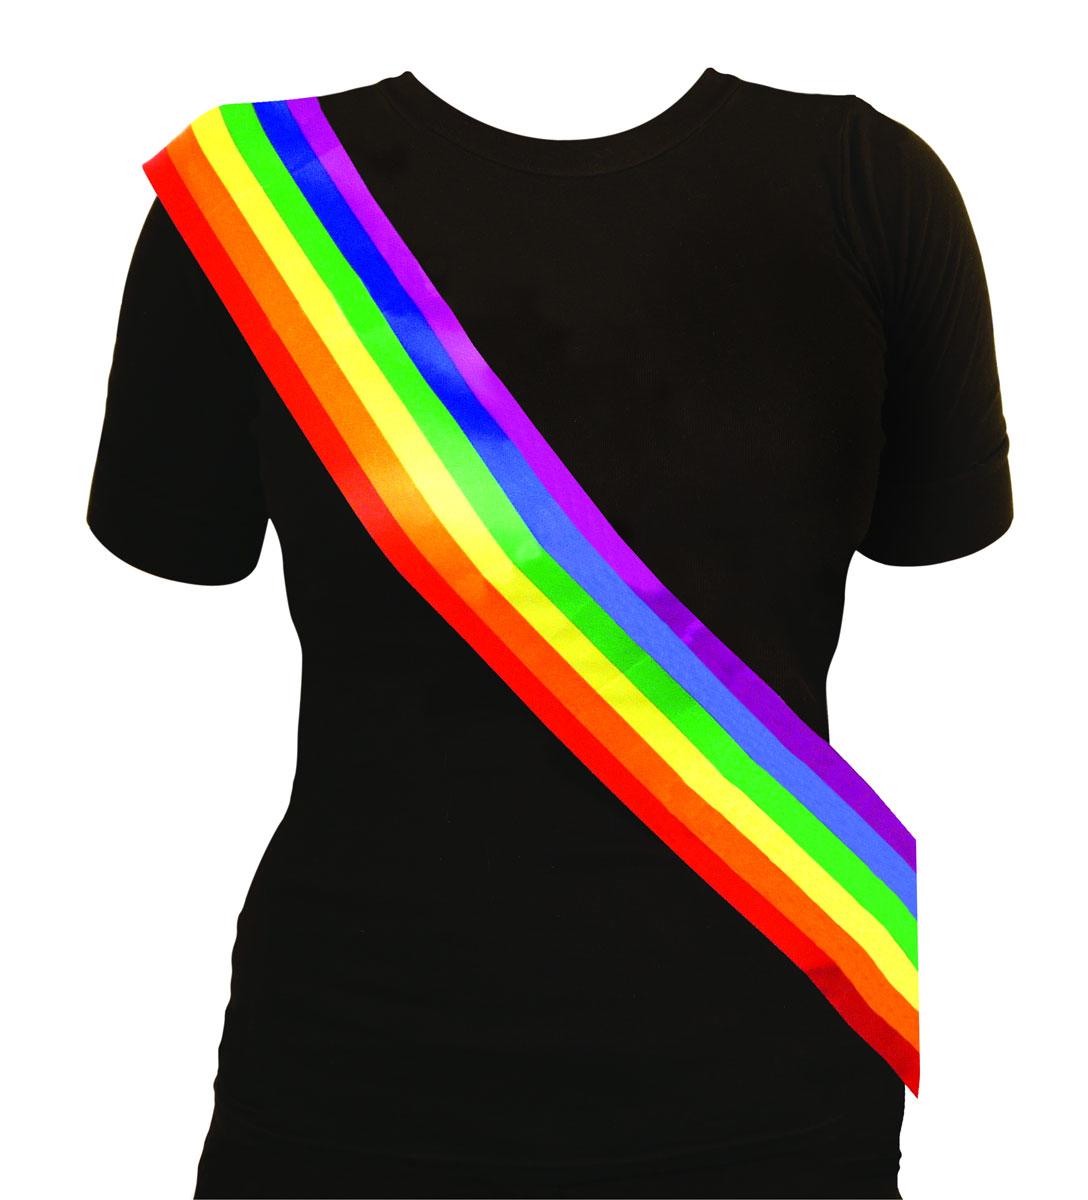 Multi-Coloured Rainbow Sash for pride marches by Henbrandt 9831 available here at Karnival Costumes online party shop